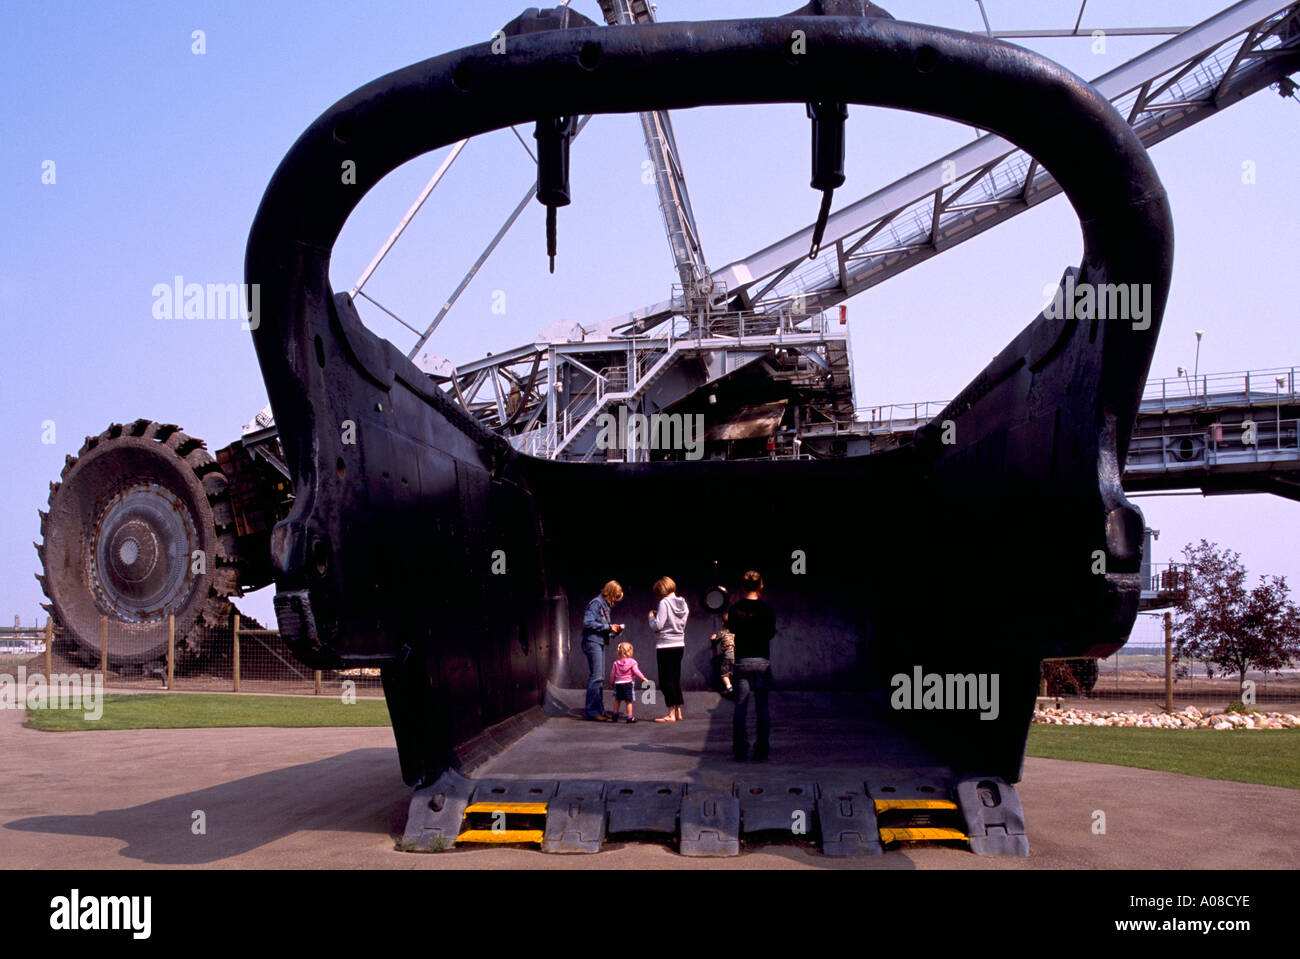 Dragline Bucket at Syncrude 'Giants of Mining Exhibit' in Athabasca Tar Sands, near Fort McMurray, Alberta, Canada Stock Photo